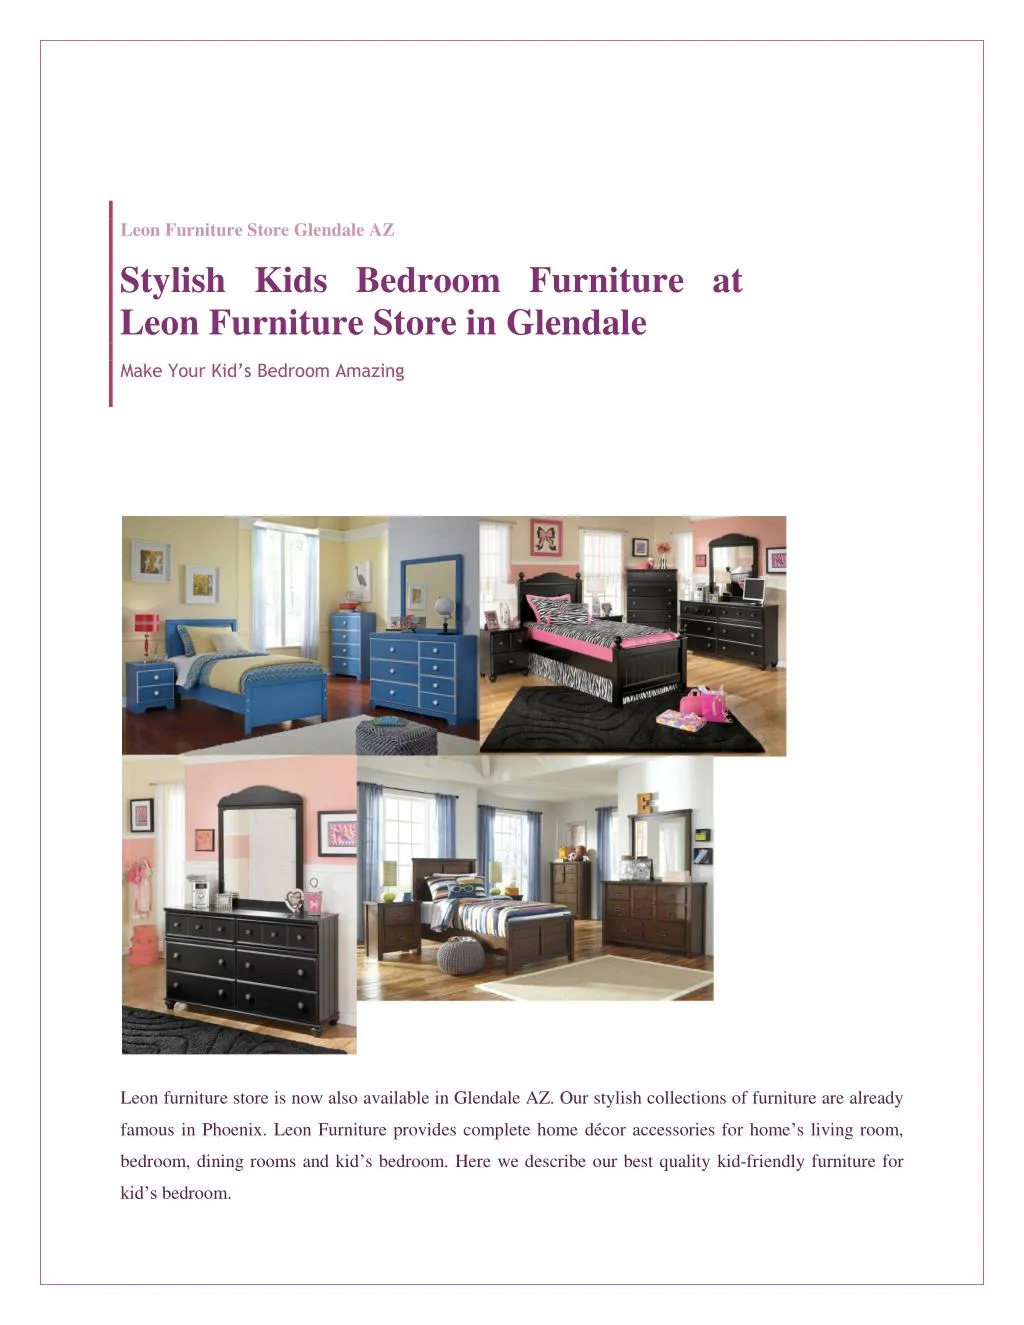 Ppt Stylish Kids Bedroom Furniture At Leon Furniture Store In